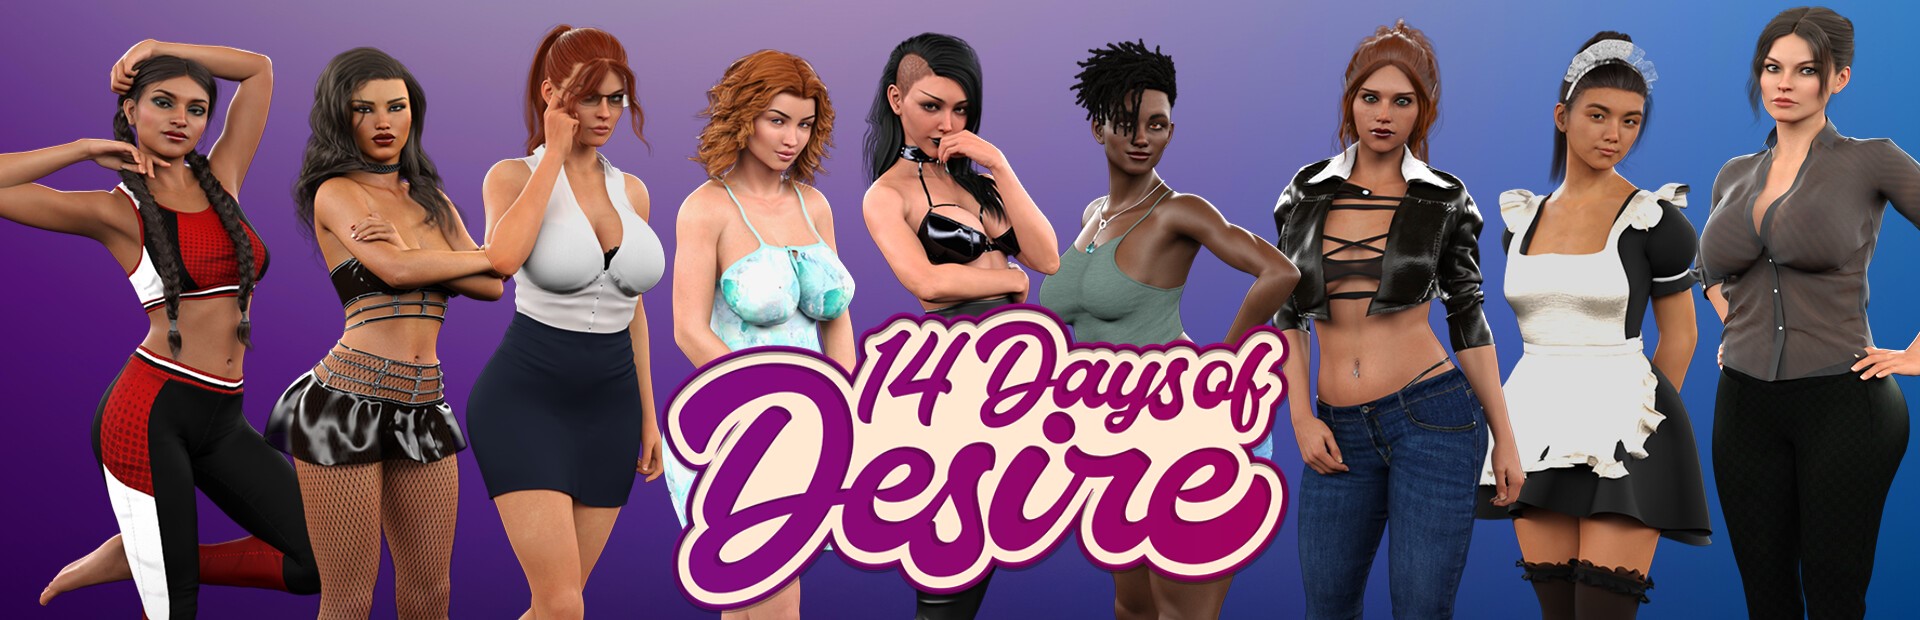 14 Days of Desire poster